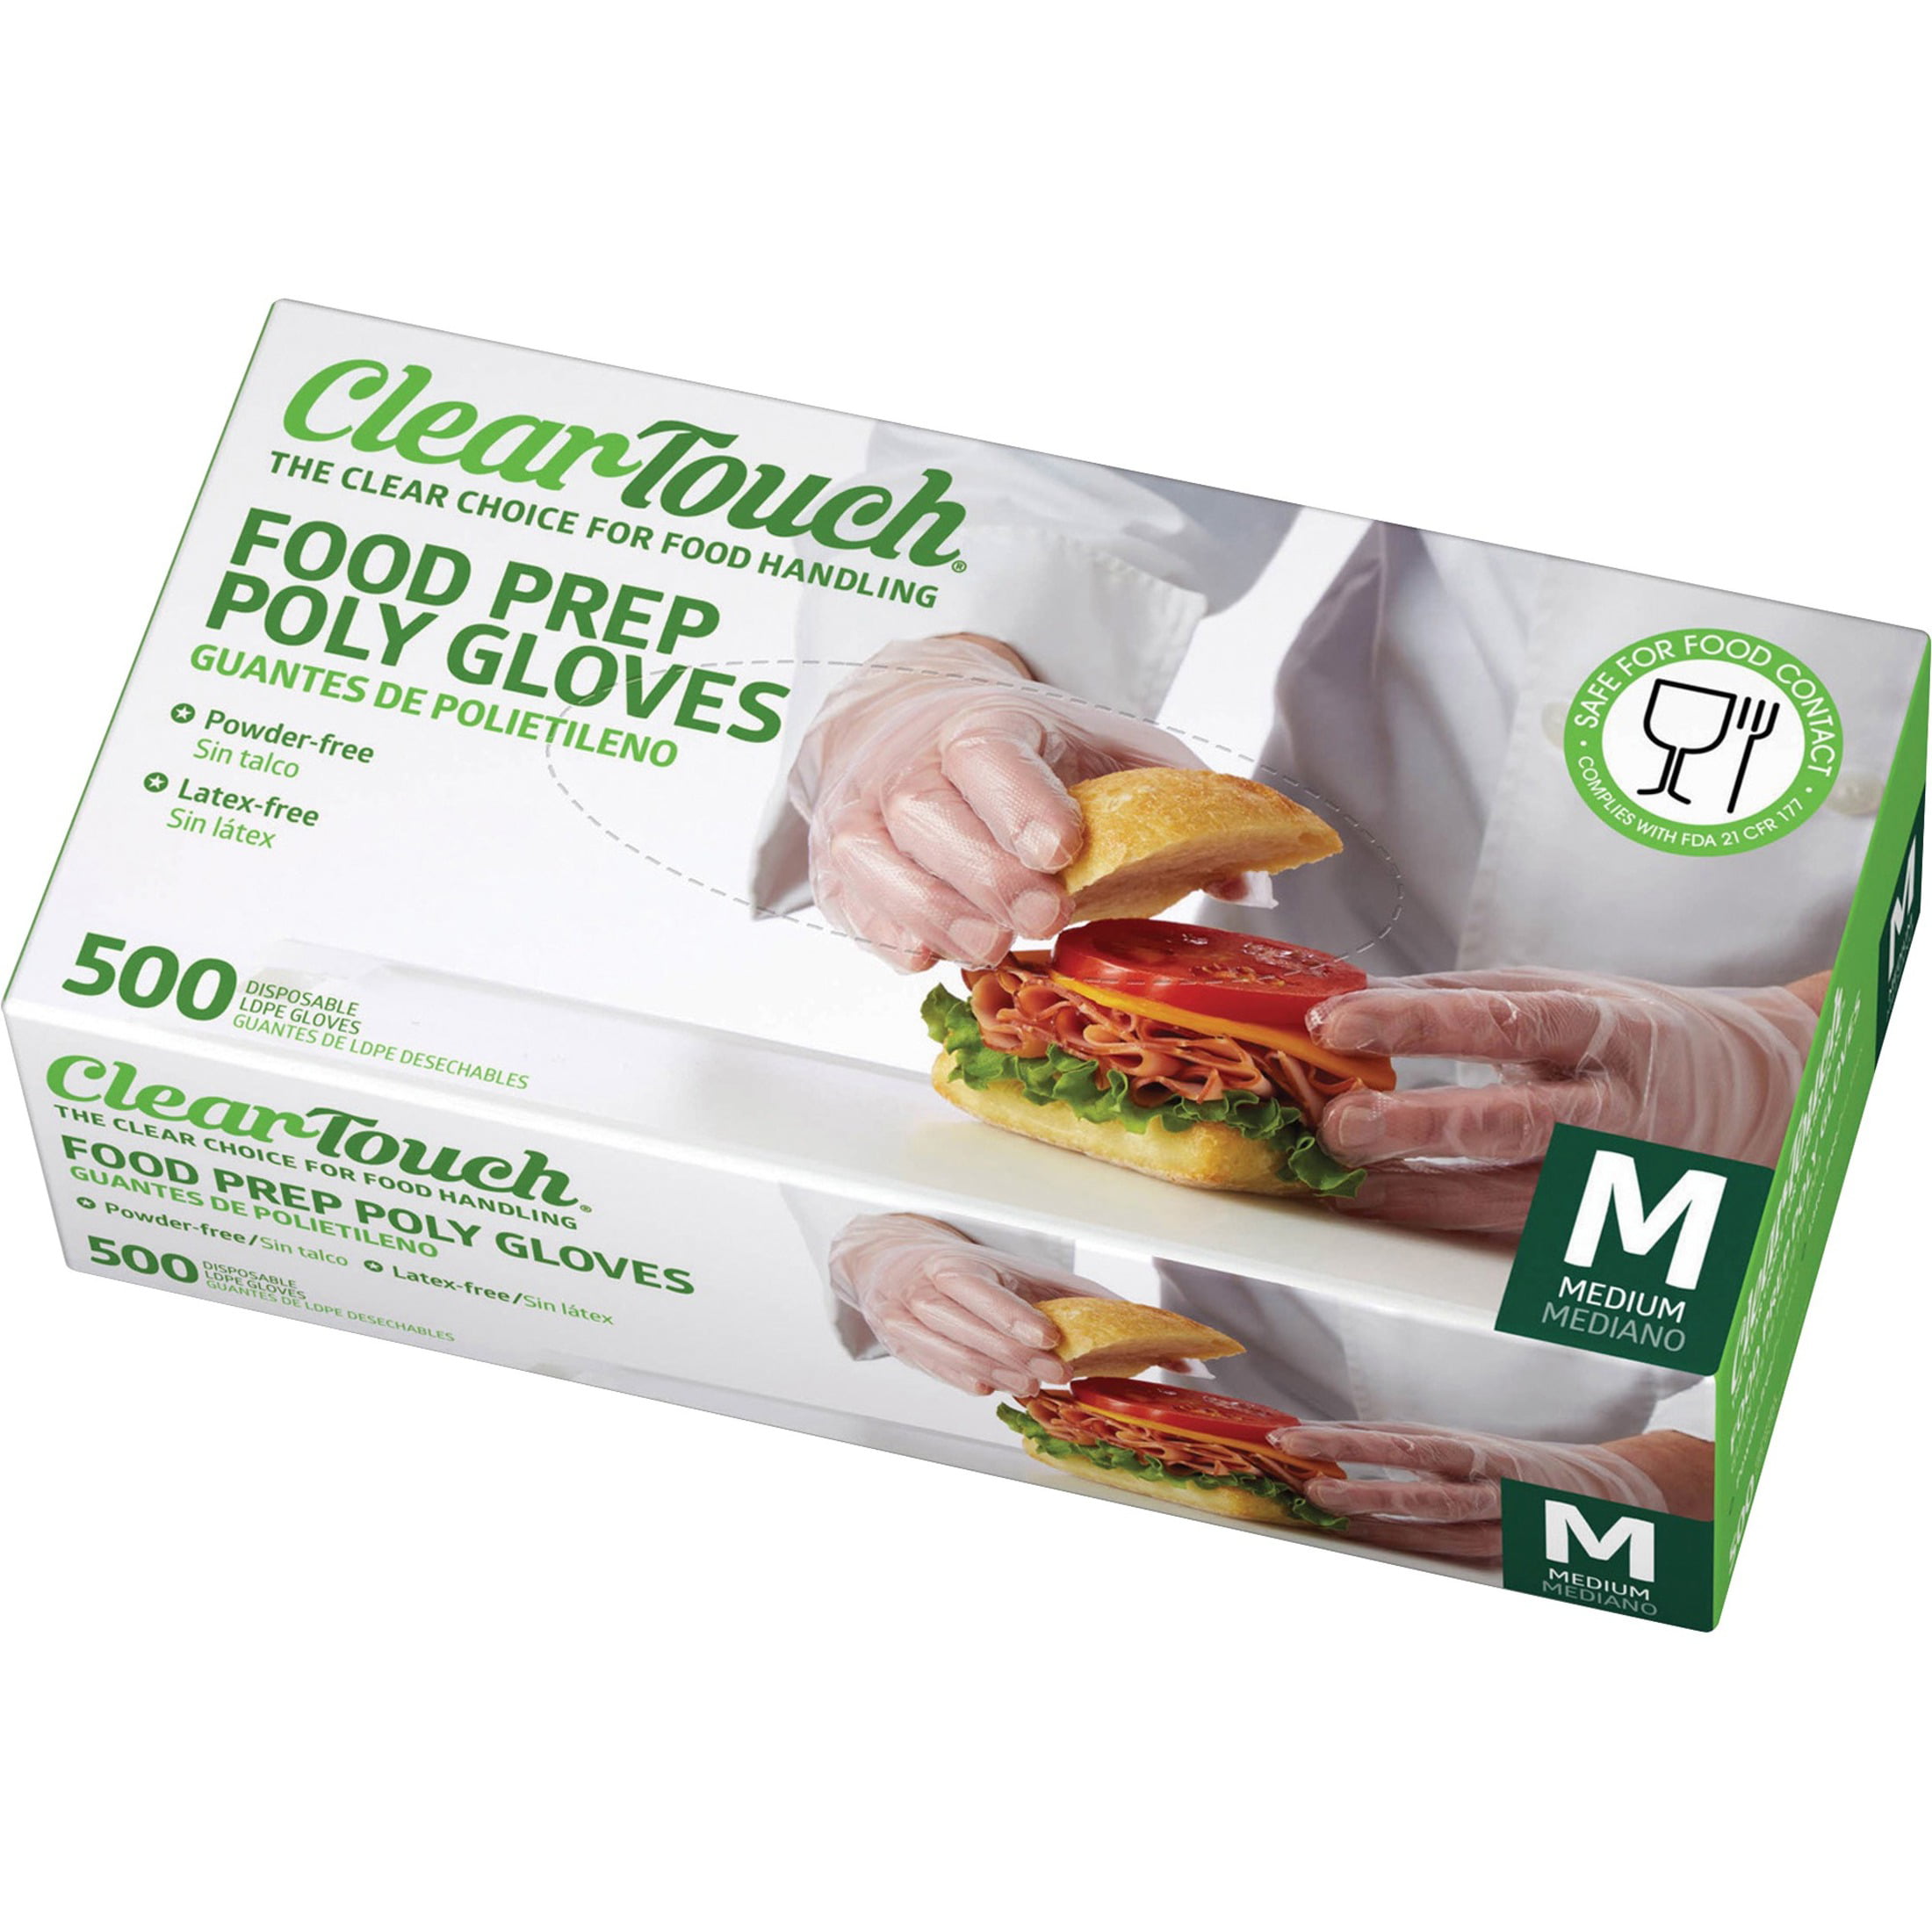 Food Prep Poly Gloves Power free Latex-Free 1 box total 500 gloves Clear Touch 